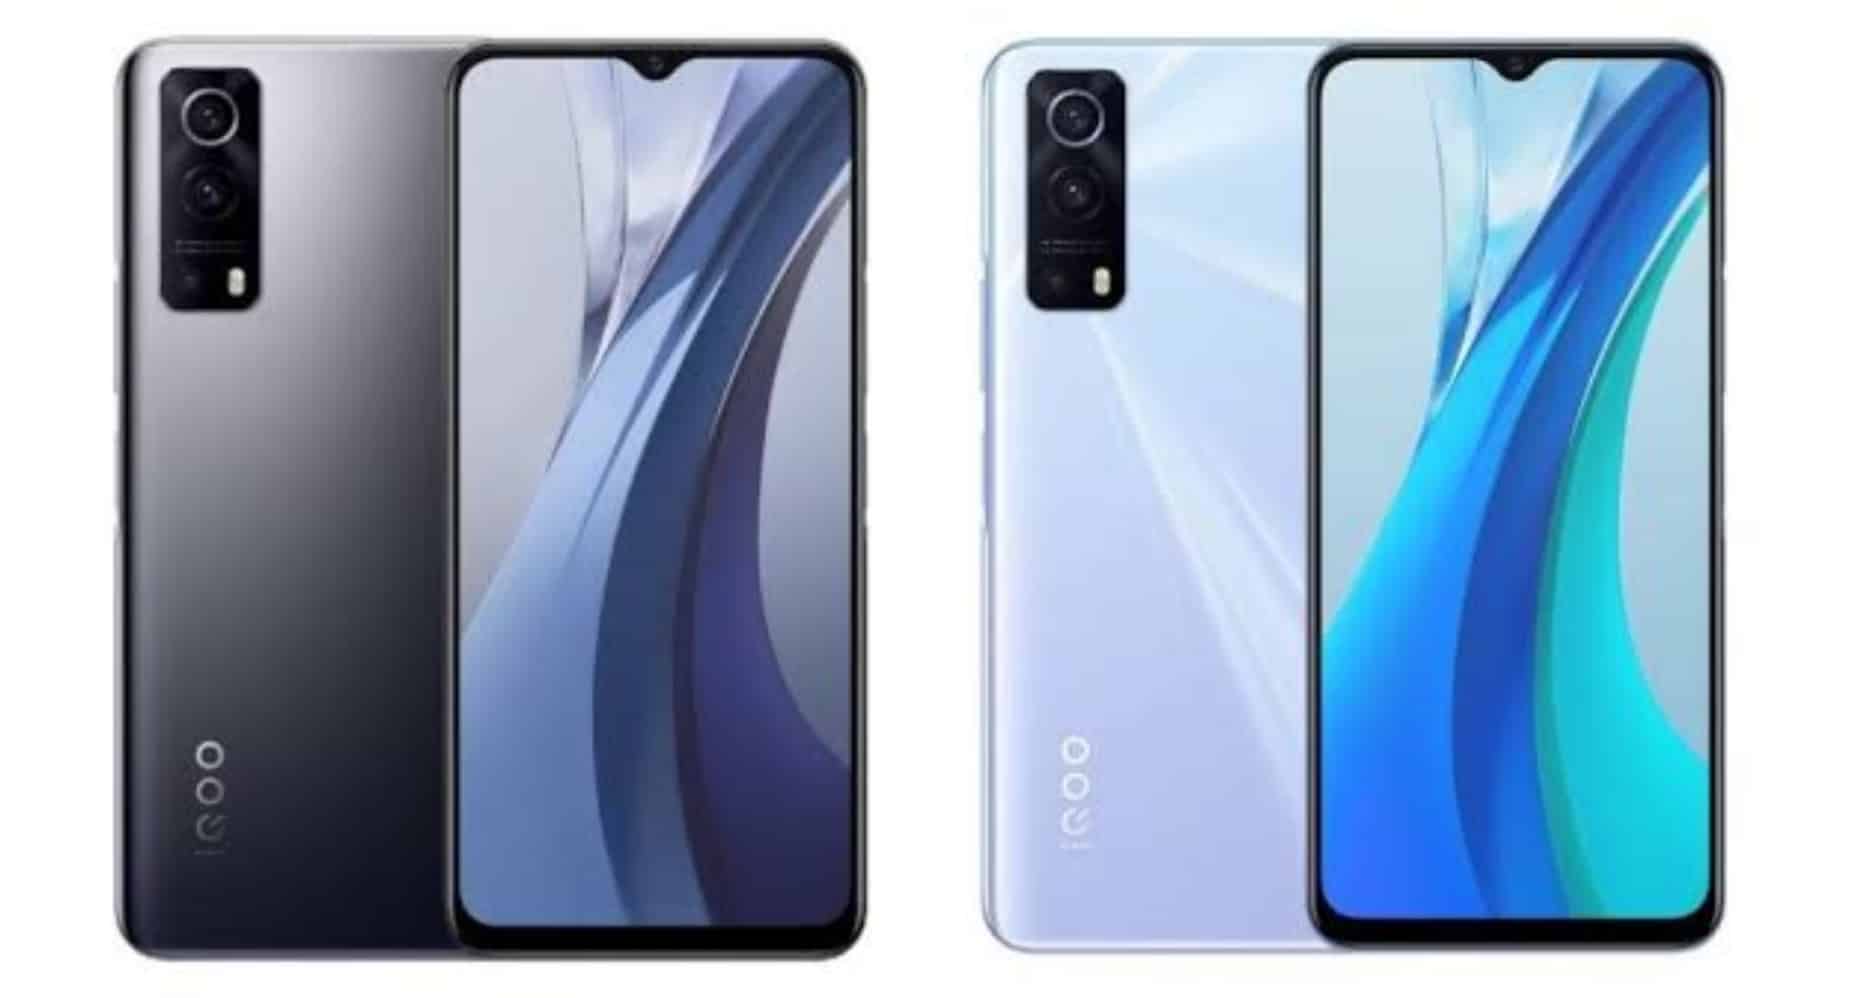 iQOO Z3 5G Receives BIS Certification, Suggests Imminent Launch in India